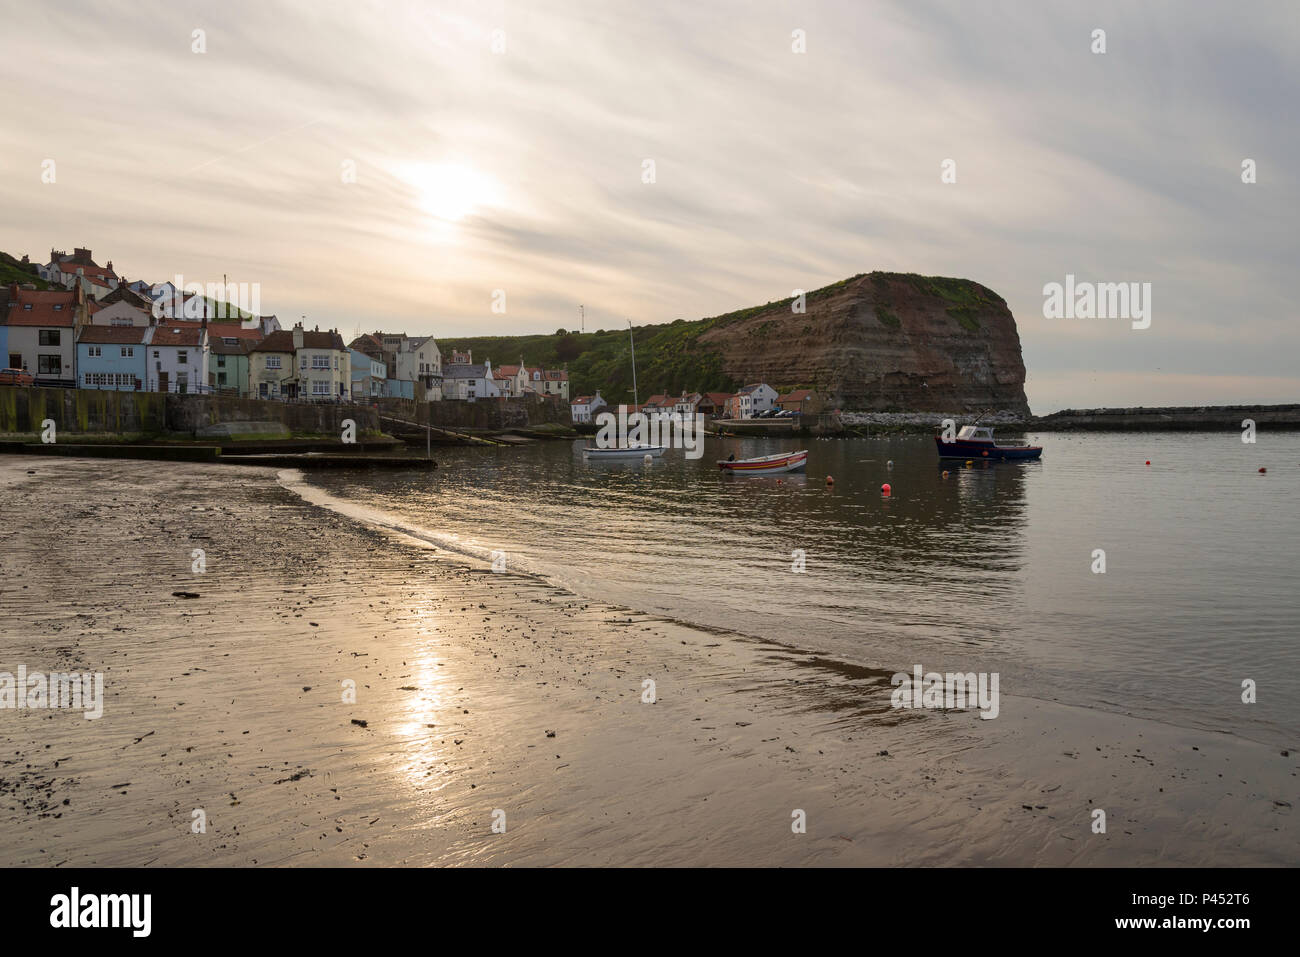 Beautiful May evening in the picturesque village of Staithes, North Yorkshire. The sun setting in a sky of high cloud above the harbour. Stock Photo